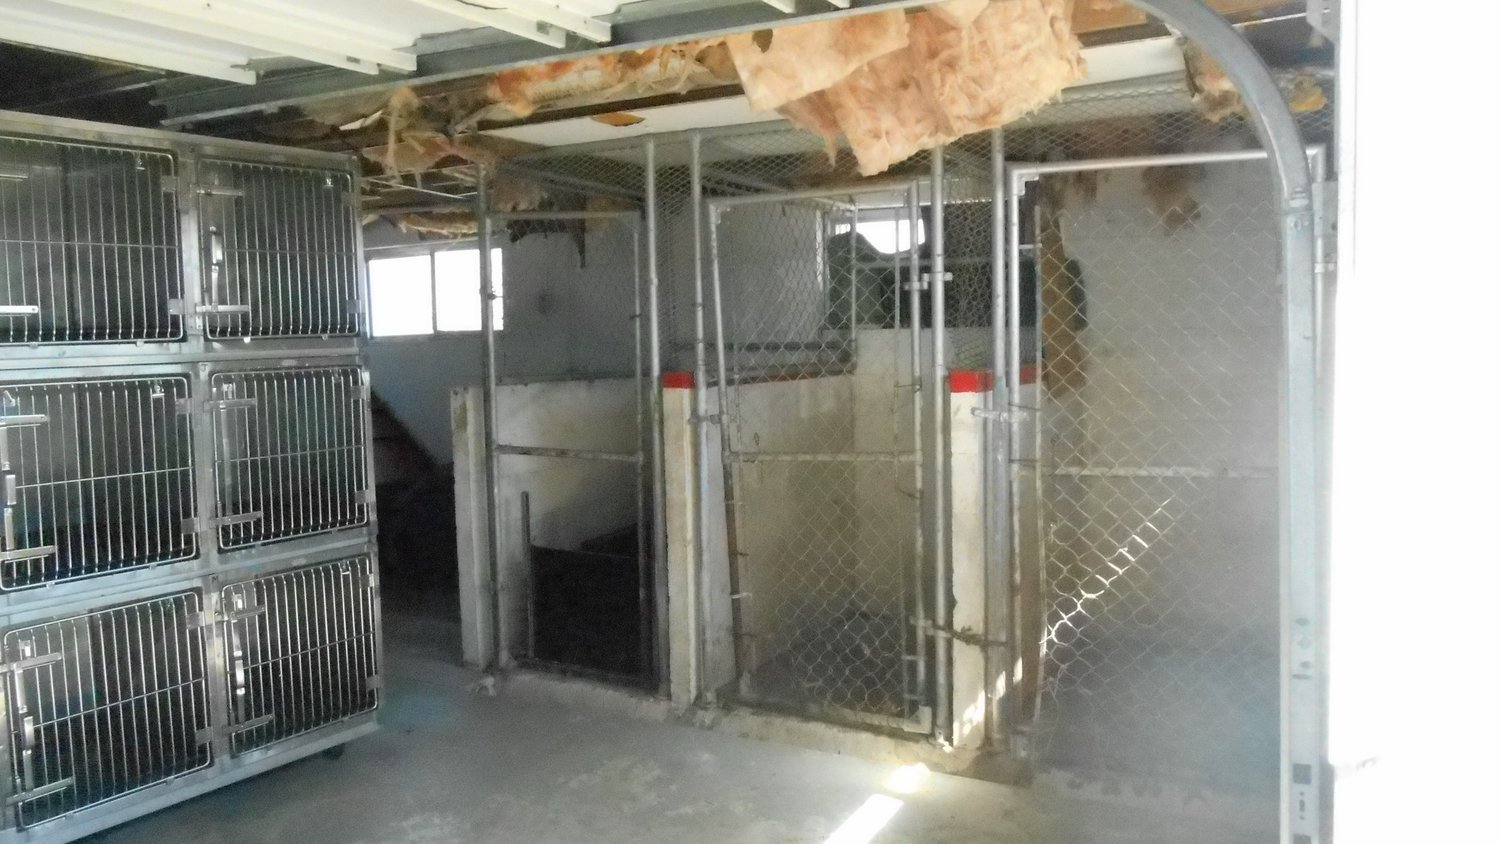 Shown here are some of the few old-school cages inside the original Animal Shelter building. Fortunately, upgrades in recent years have created humane spaces for detaining animals. Bids are being sought for demolition of the original building, with an eye to construction of a new structure, or possibly an addition on the current shelter.